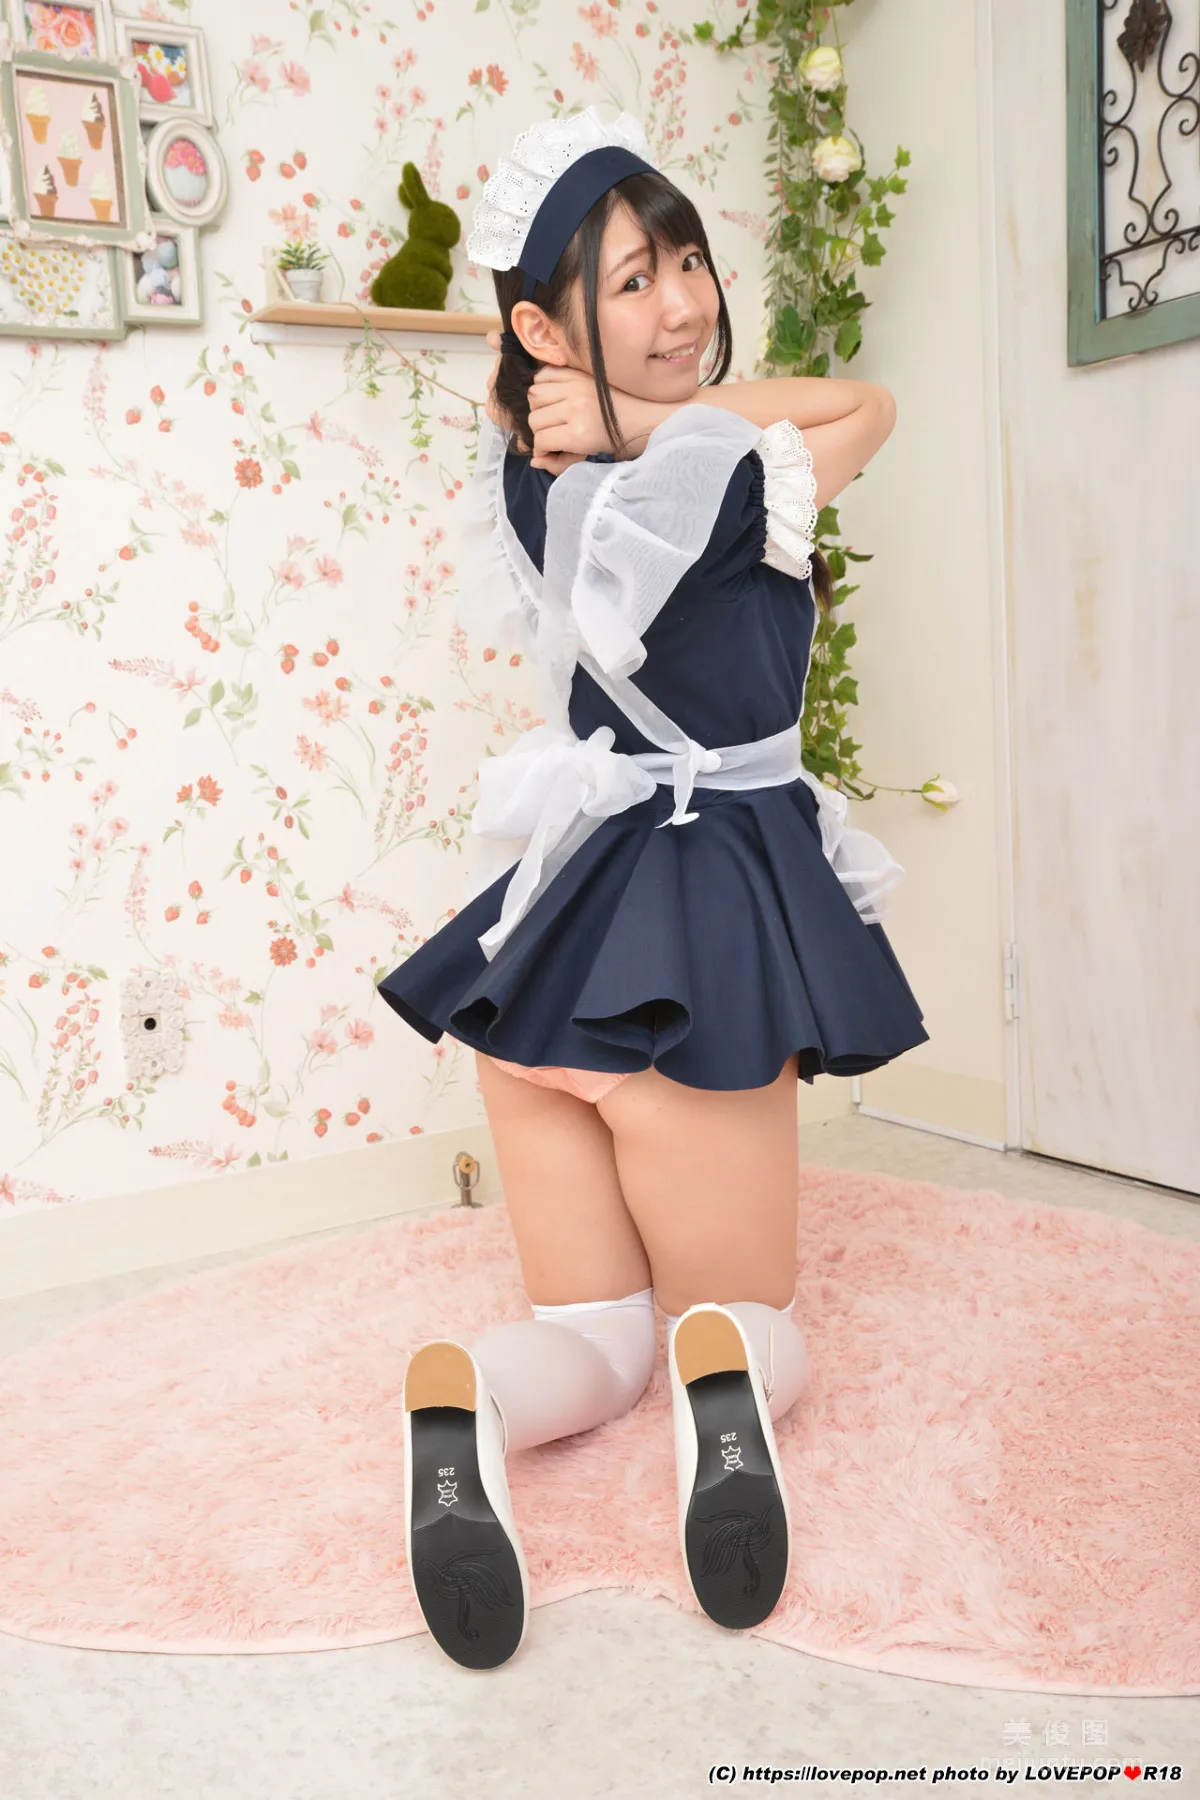 [LOVEPOP] Special Maid Collection - 白井ゆずか Photoset 0132